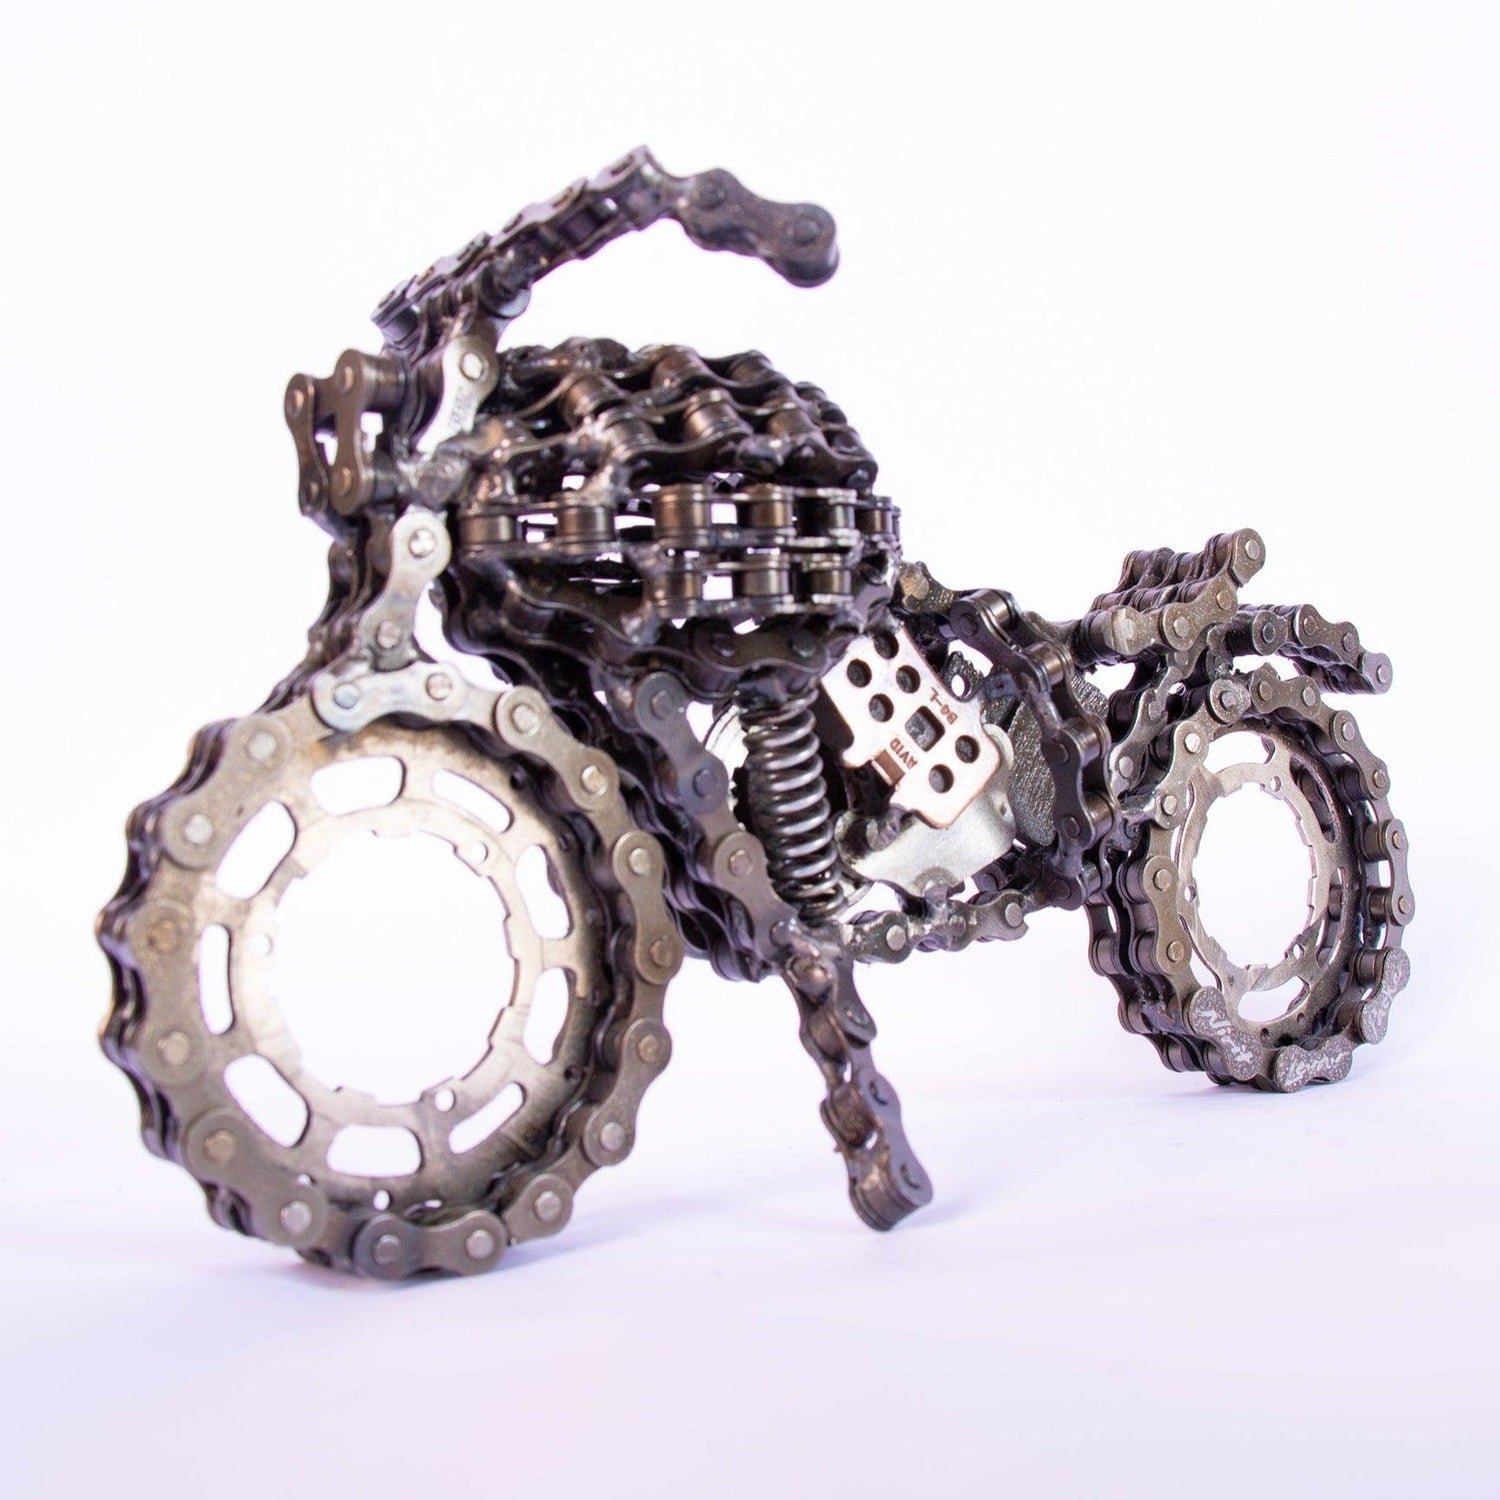 Motorcycle Sculpture | UNCHAINED by NIRIT LEVAV PACKER